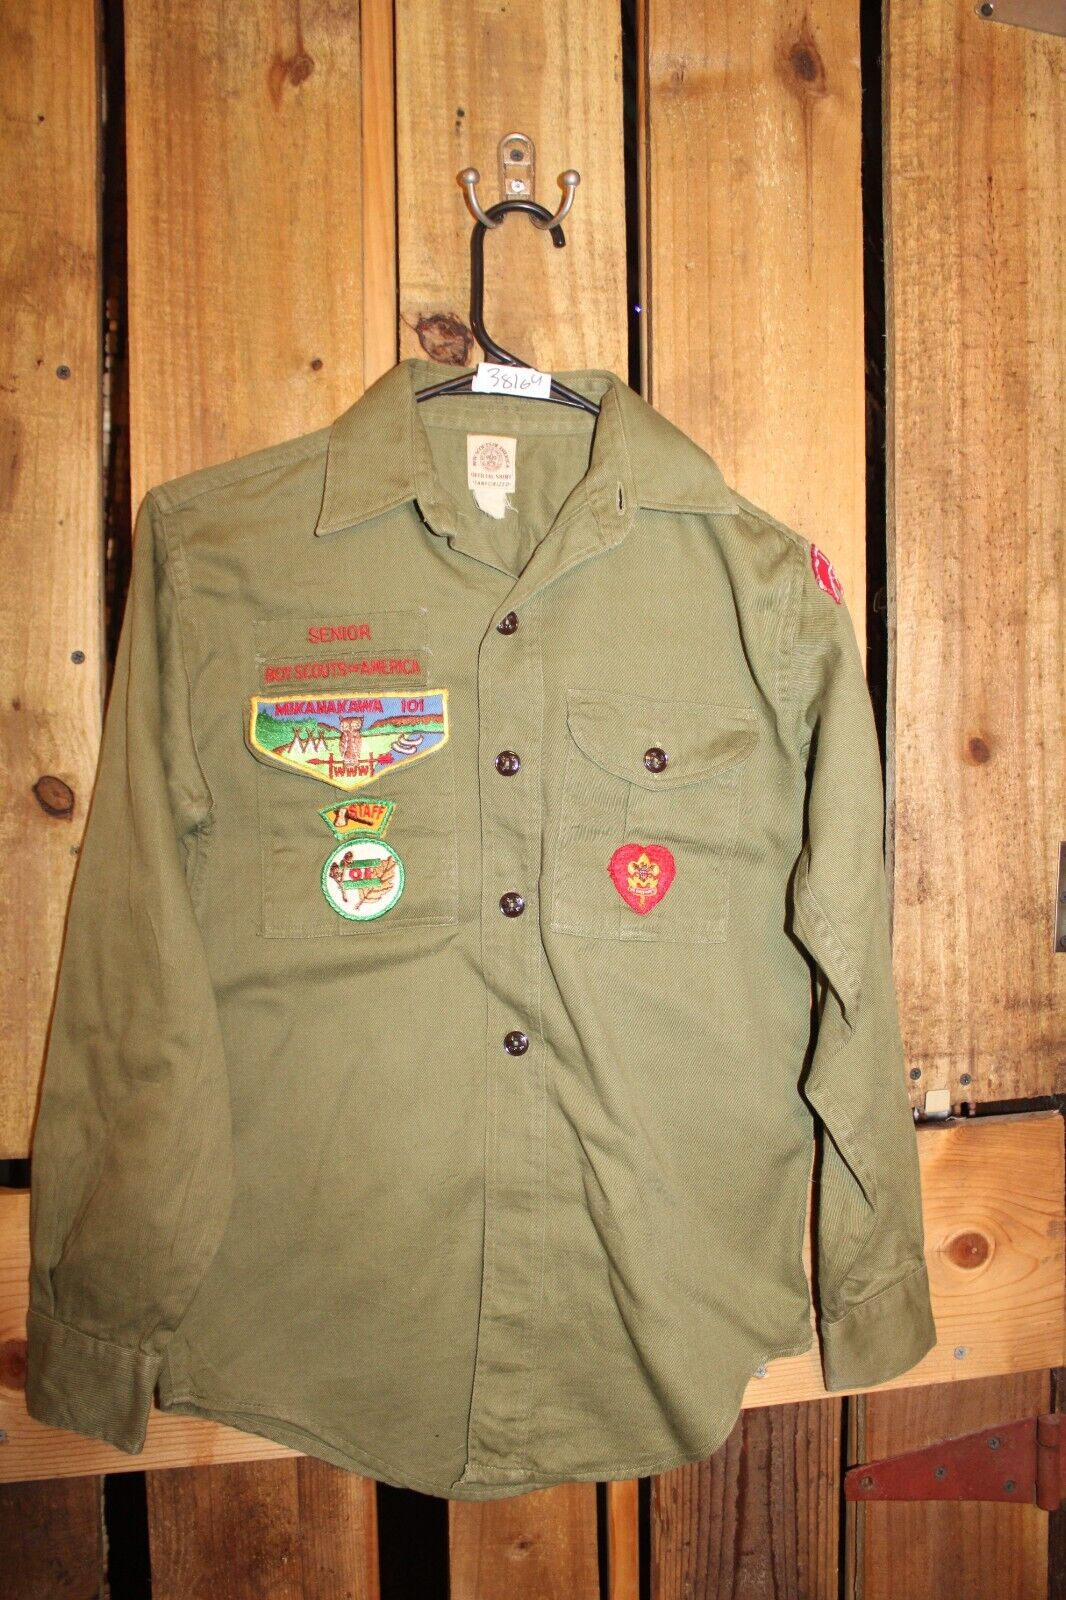 Boy Scouts of America BSA Youth Shirt Green Vintage Sewn on patches Medium (?)